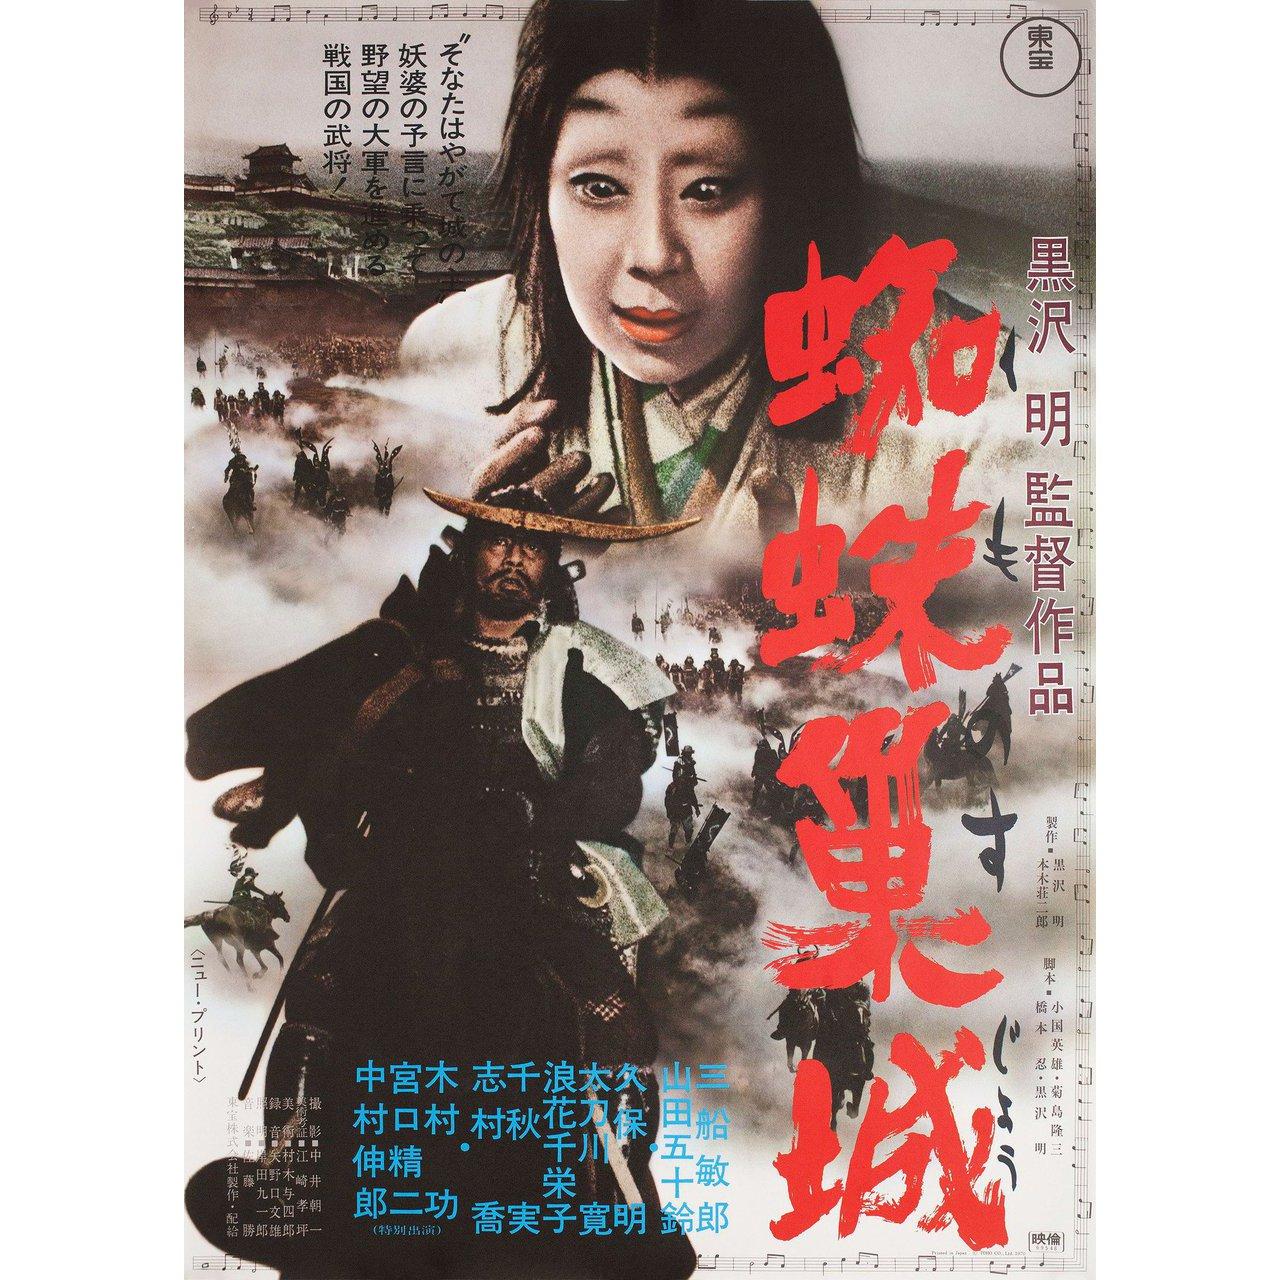 Original 1970 re-release Japanese B2 poster for the 1957 film Throne of Blood directed by Akira Kurosawa with Toshiro Mifune / Isuzu Yamada / Takashi Shimura / Akira Kubo. Fine condition, rolled. Please note: the size is stated in inches and the